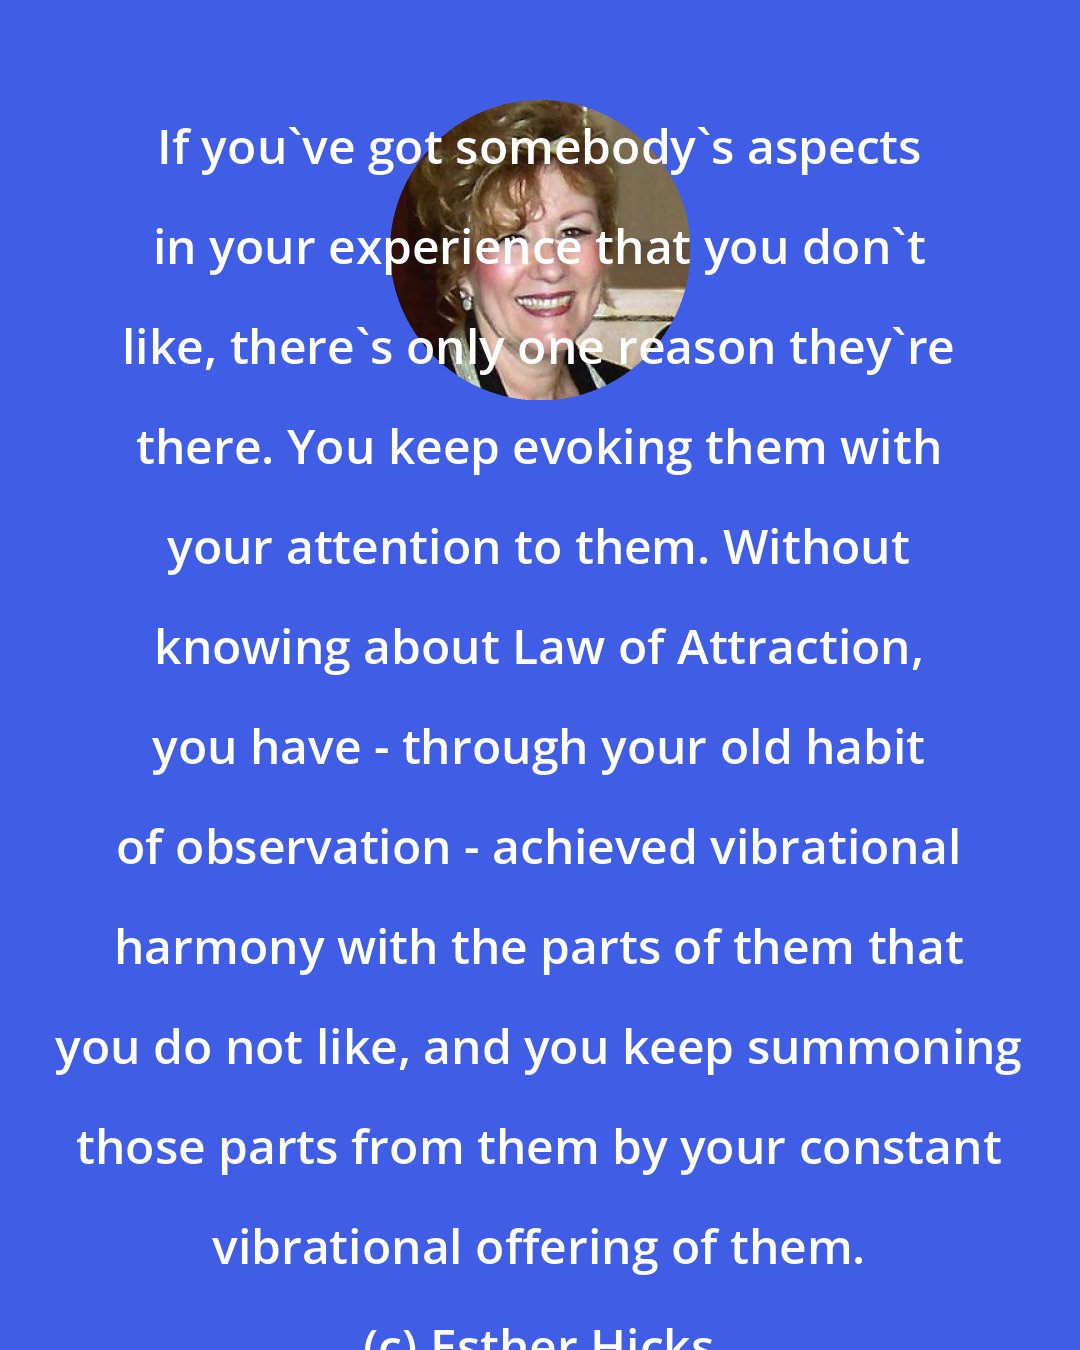 Esther Hicks: If you've got somebody's aspects in your experience that you don't like, there's only one reason they're there. You keep evoking them with your attention to them. Without knowing about Law of Attraction, you have - through your old habit of observation - achieved vibrational harmony with the parts of them that you do not like, and you keep summoning those parts from them by your constant vibrational offering of them.